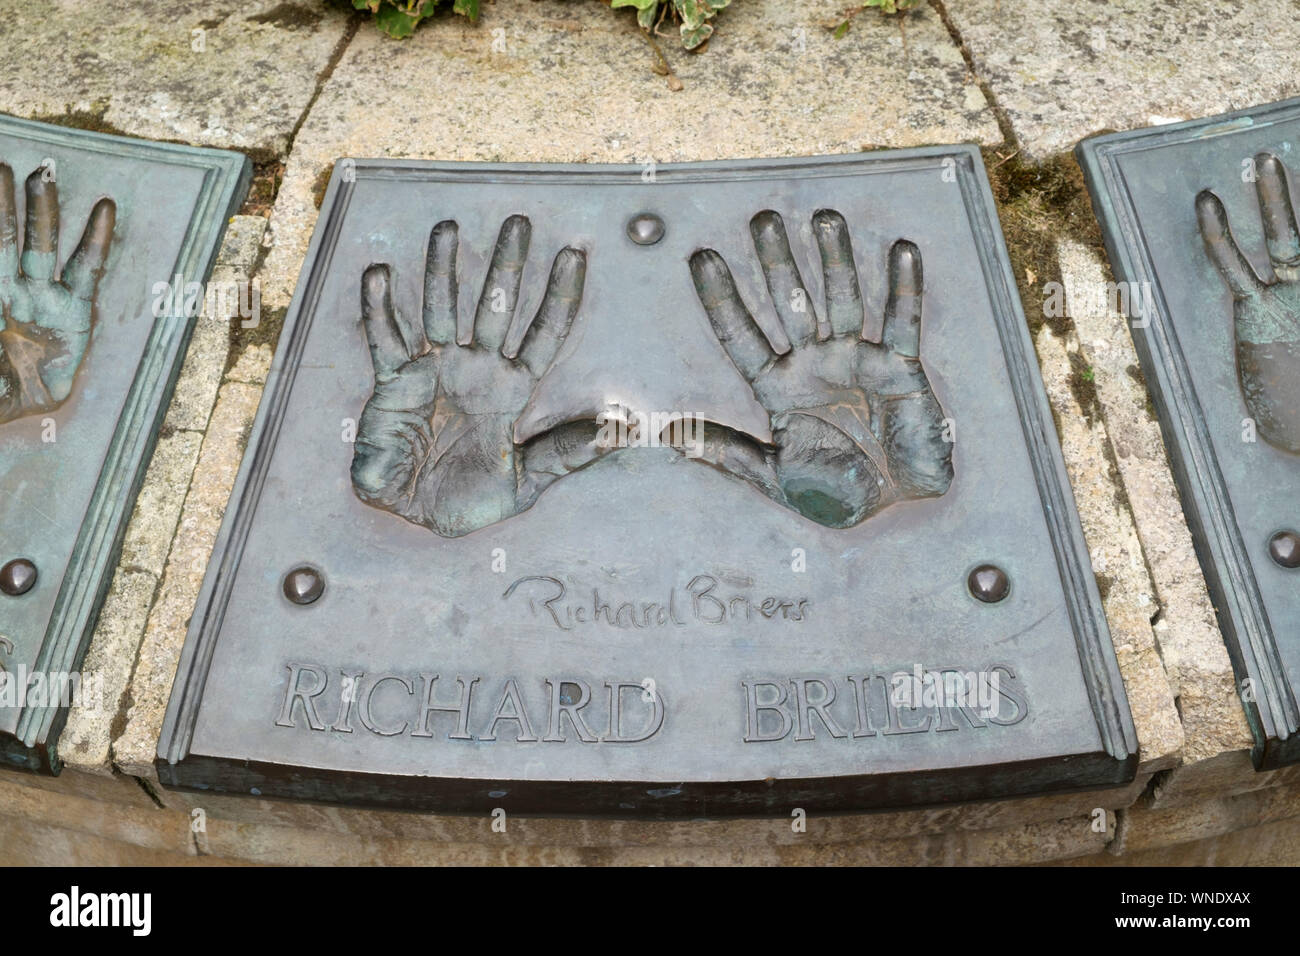 The Hand Fountain near Saw Close Bath. Broze reliefs of famous Actors hands. Stock Photo